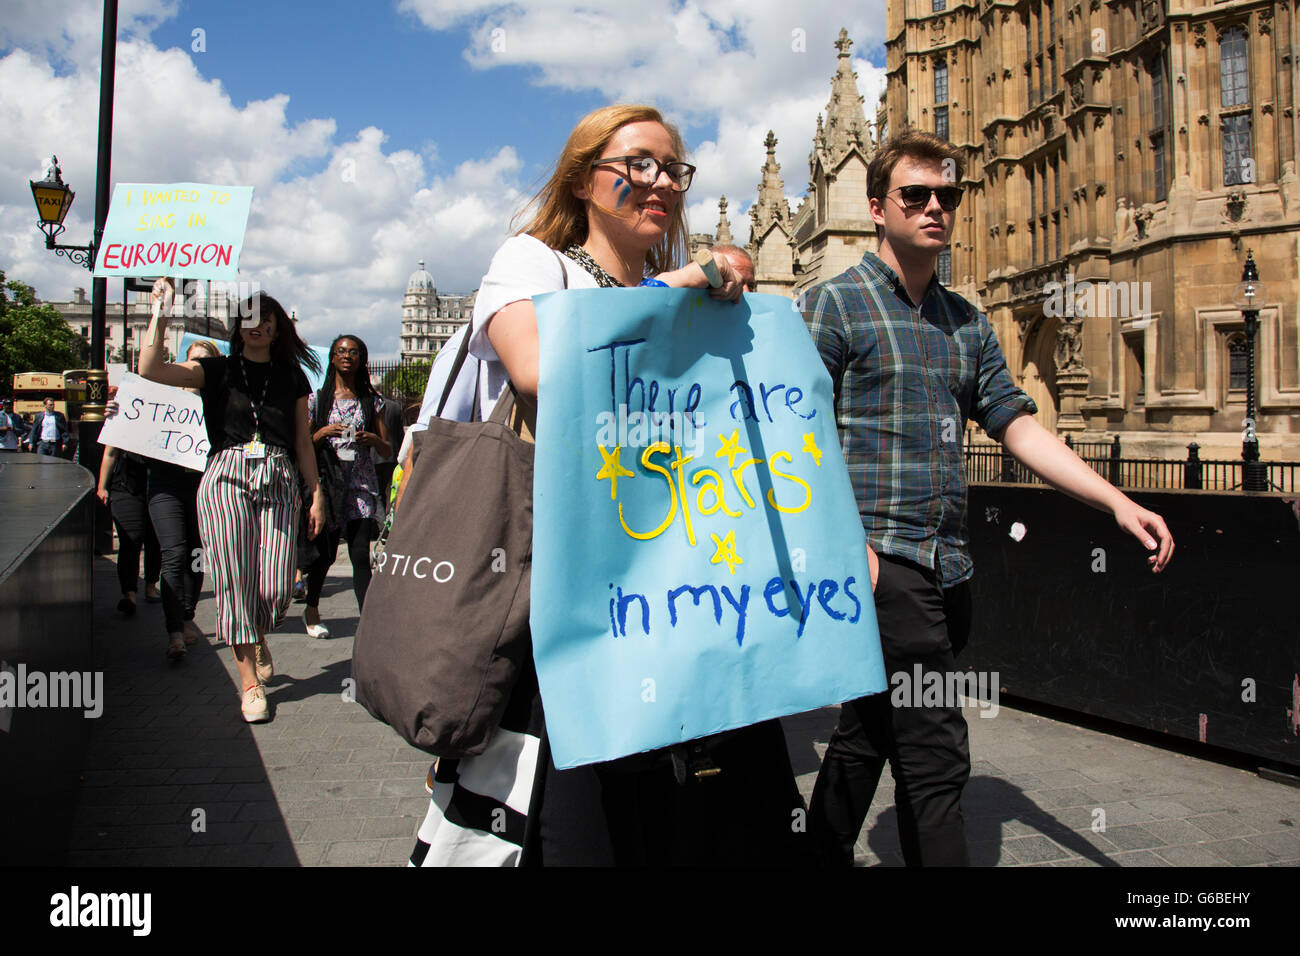 London, UK. 24th June, 2016. Protesters march towards College Green in Westminster outside the Houses of Parliamant following a Leave vote, also known as Brexit as the EU Referendum in the UK votes to leave the European Union on June 24th 2016 in London, United Kingdom. Membership of the European Union has been a topic of debate in the UK since the country joined the EEC, or Common Market in 1973. Credit:  Michael Kemp/Alamy Live News Stock Photo